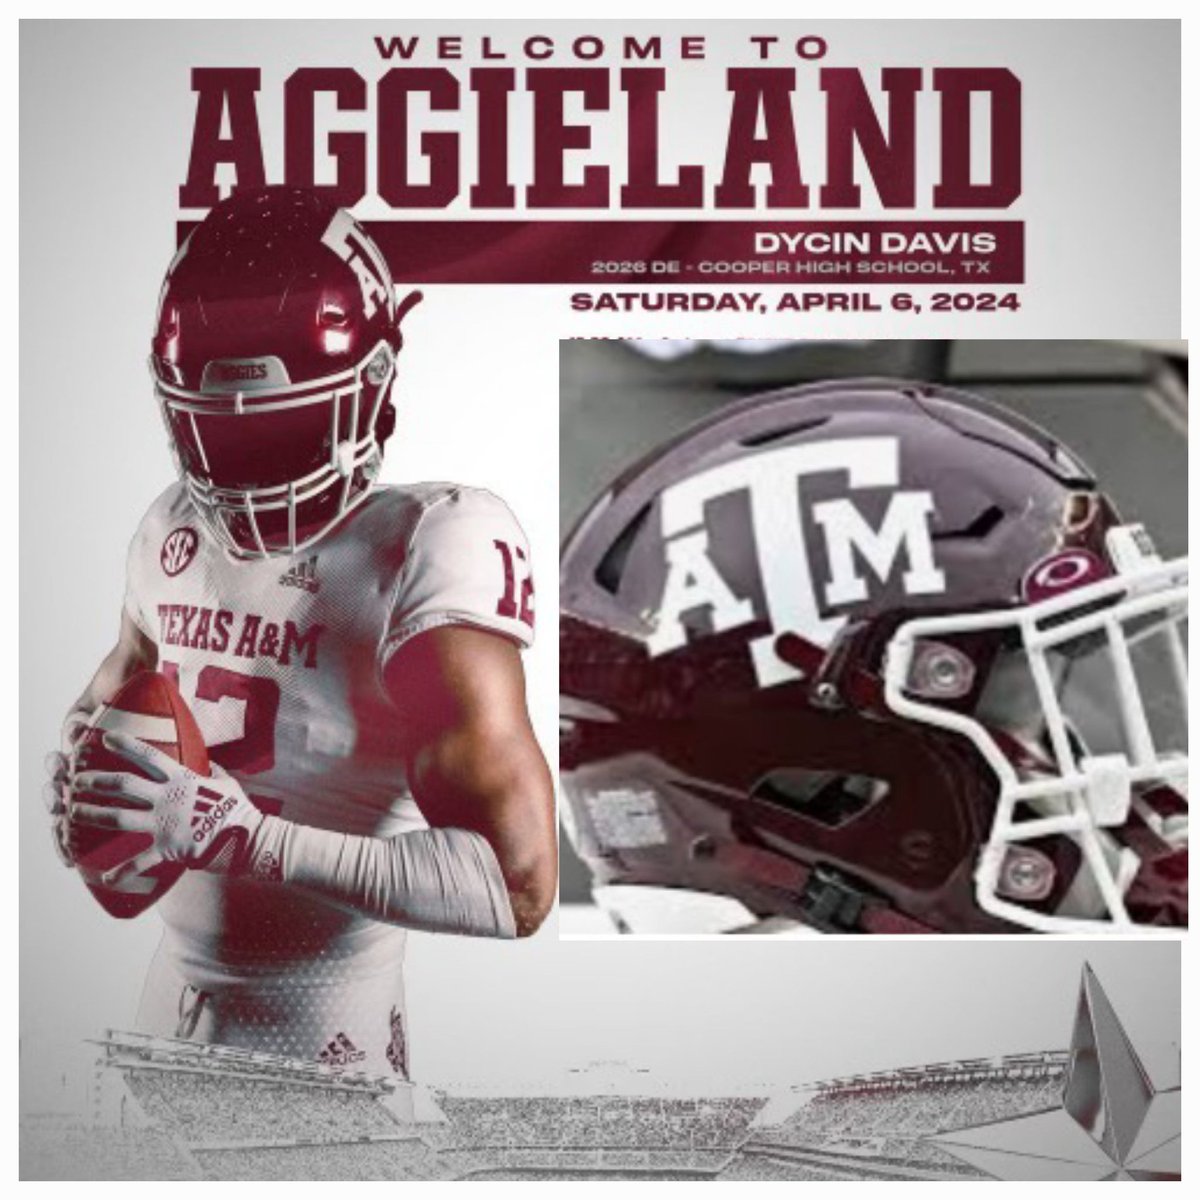 I'll be attending @AggieFootball practice this Saturday. @CoachMikeElko @ShaunCookFB @SpenceChaos @Coach_Hadnot @CoachARoan @Coopercoogs1 @UnderArmour @ArmyBowlCombine @BCHsports